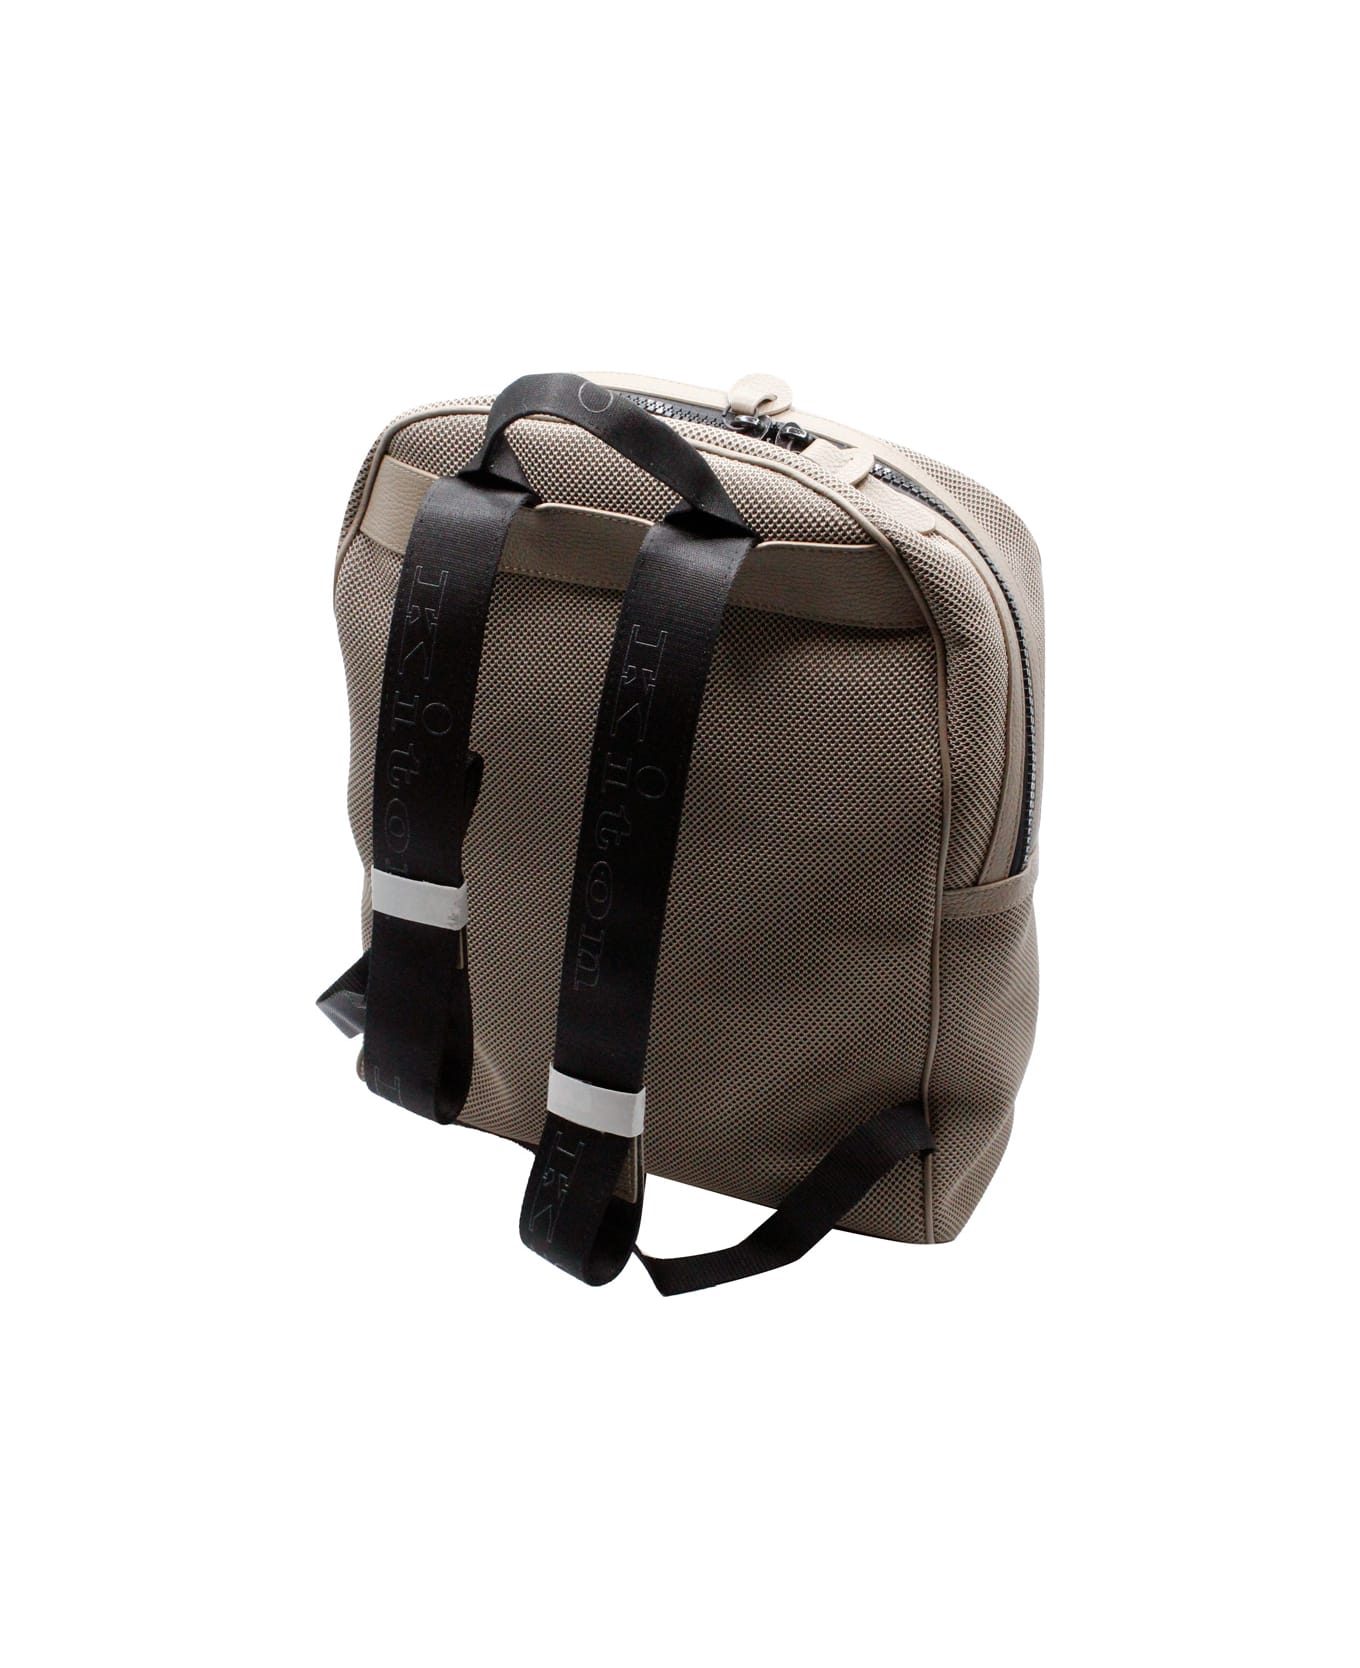 Kiton Backpack In Textured Technical Fabric With Leather Inserts - Taupe